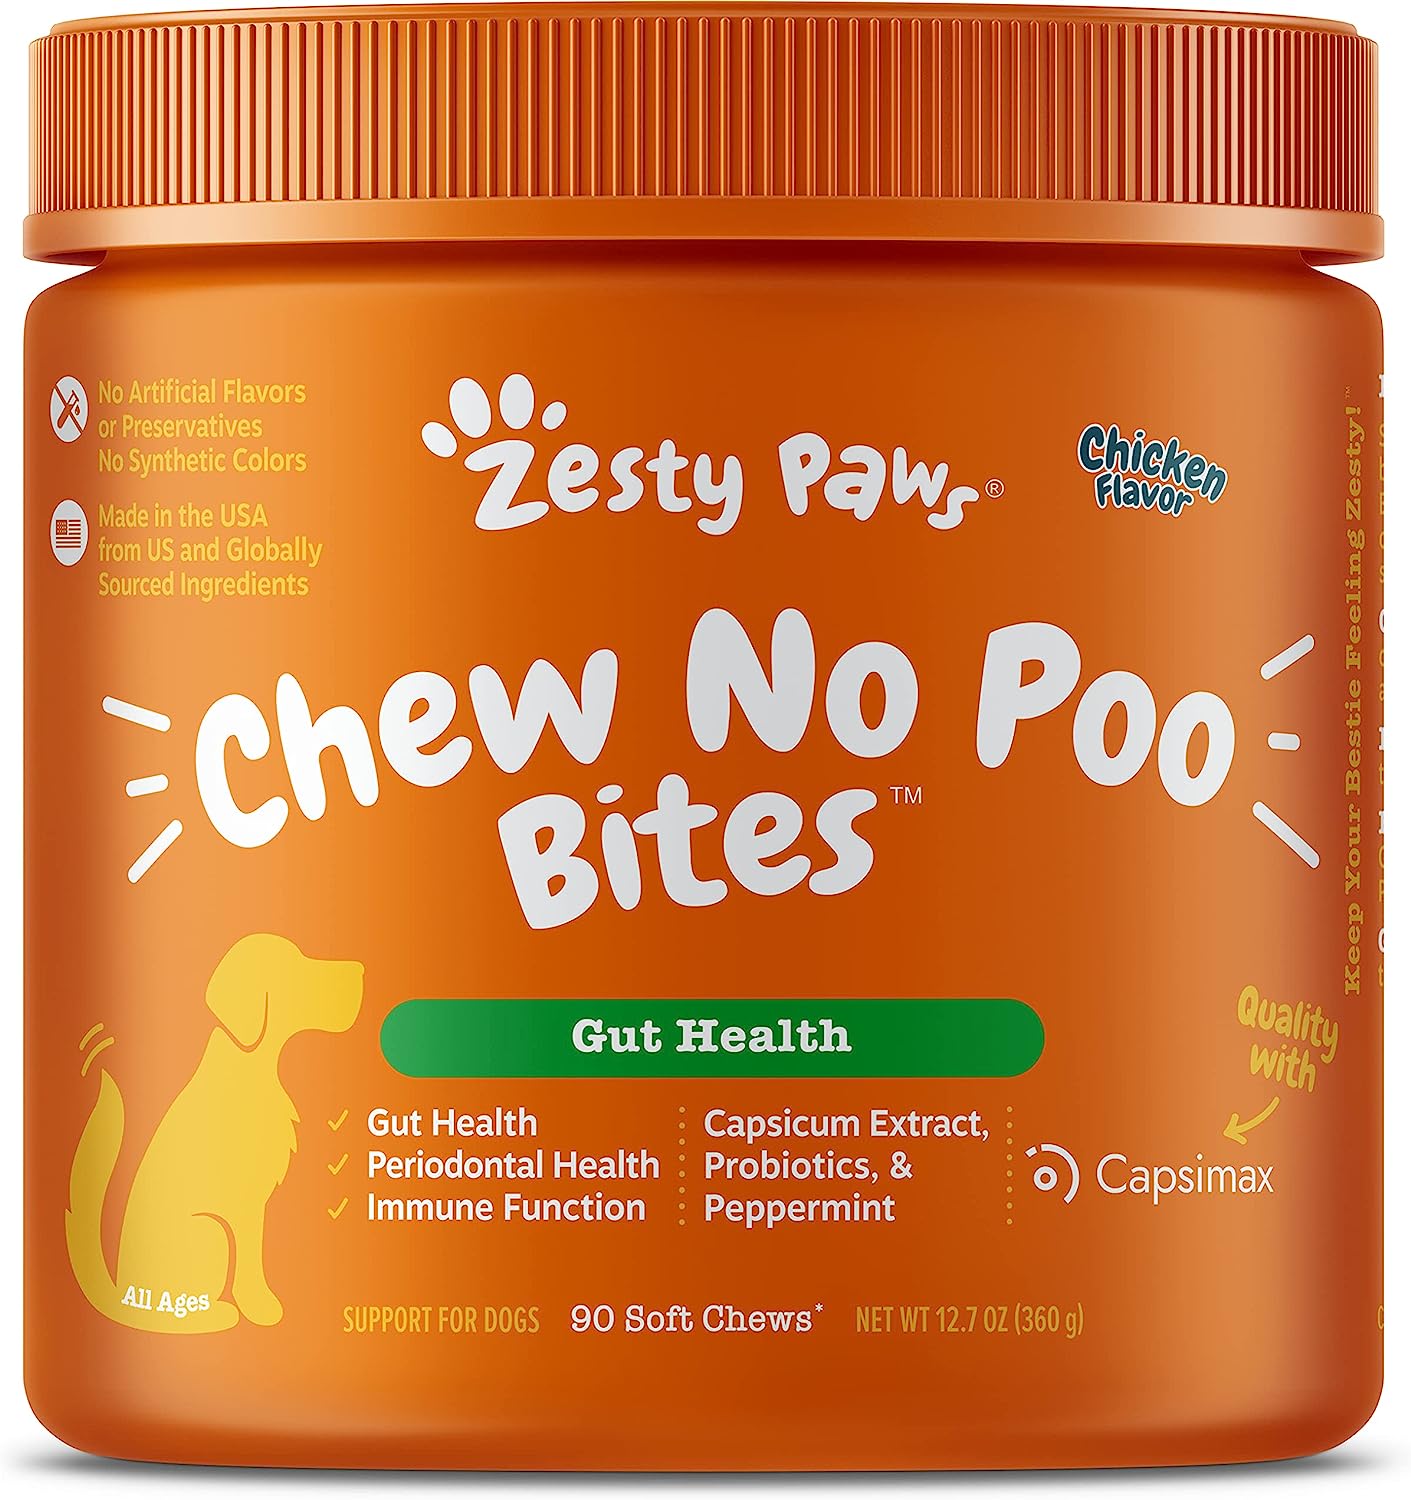 2. Zesty Paws Chew No Poo Bites for Dogs